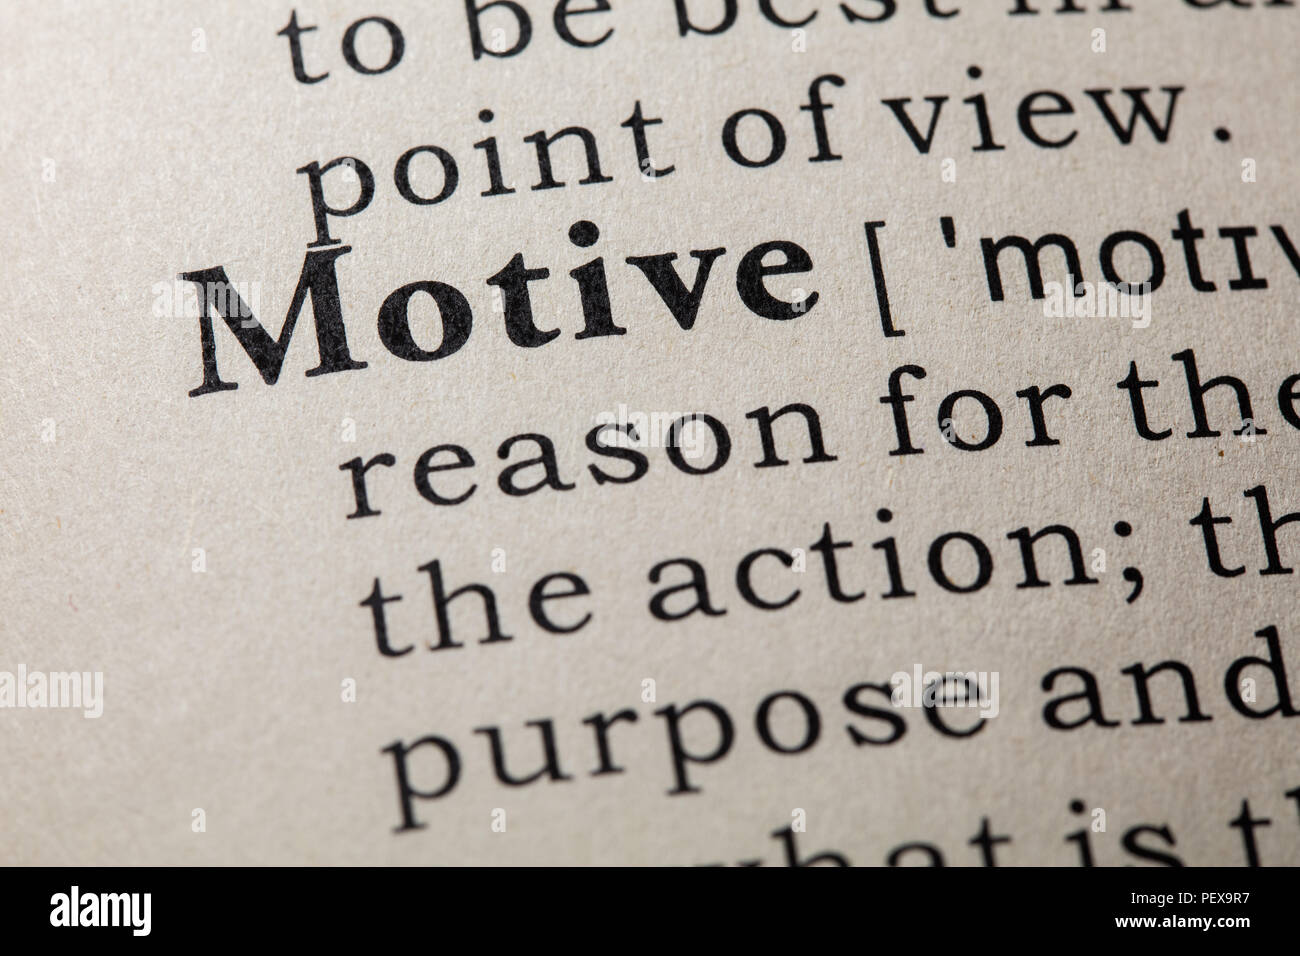 Fake Dictionary, Dictionary definition of the word motive. including key descriptive words. Stock Photo